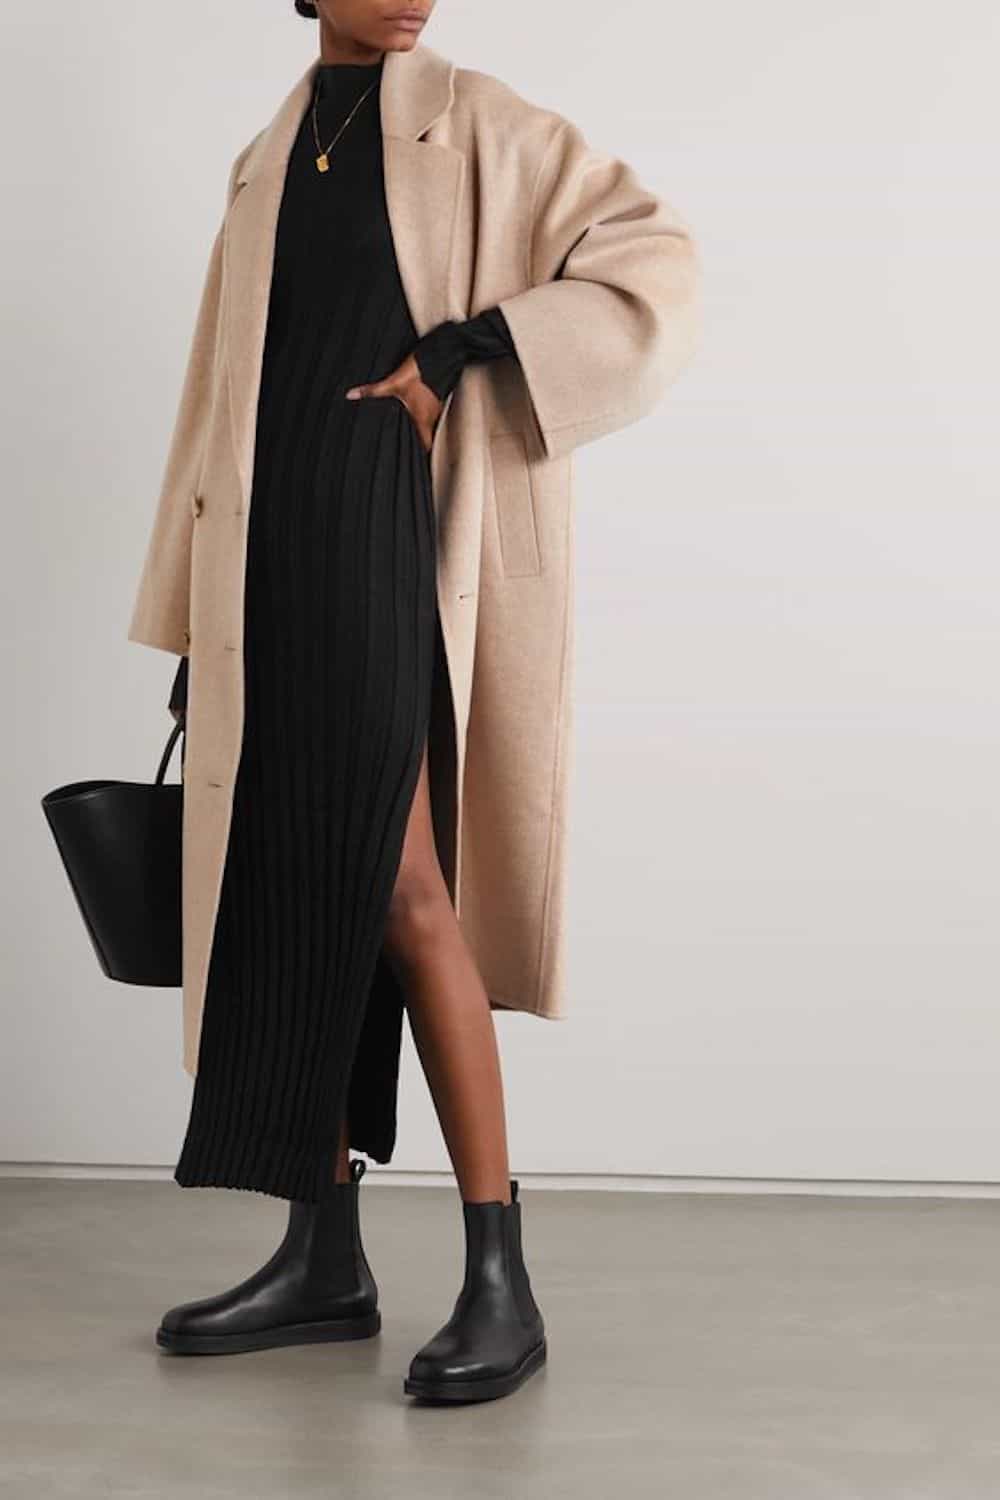 image of a woman from the shoulders down in a long black sweater dress with a wool coat and black lug boots